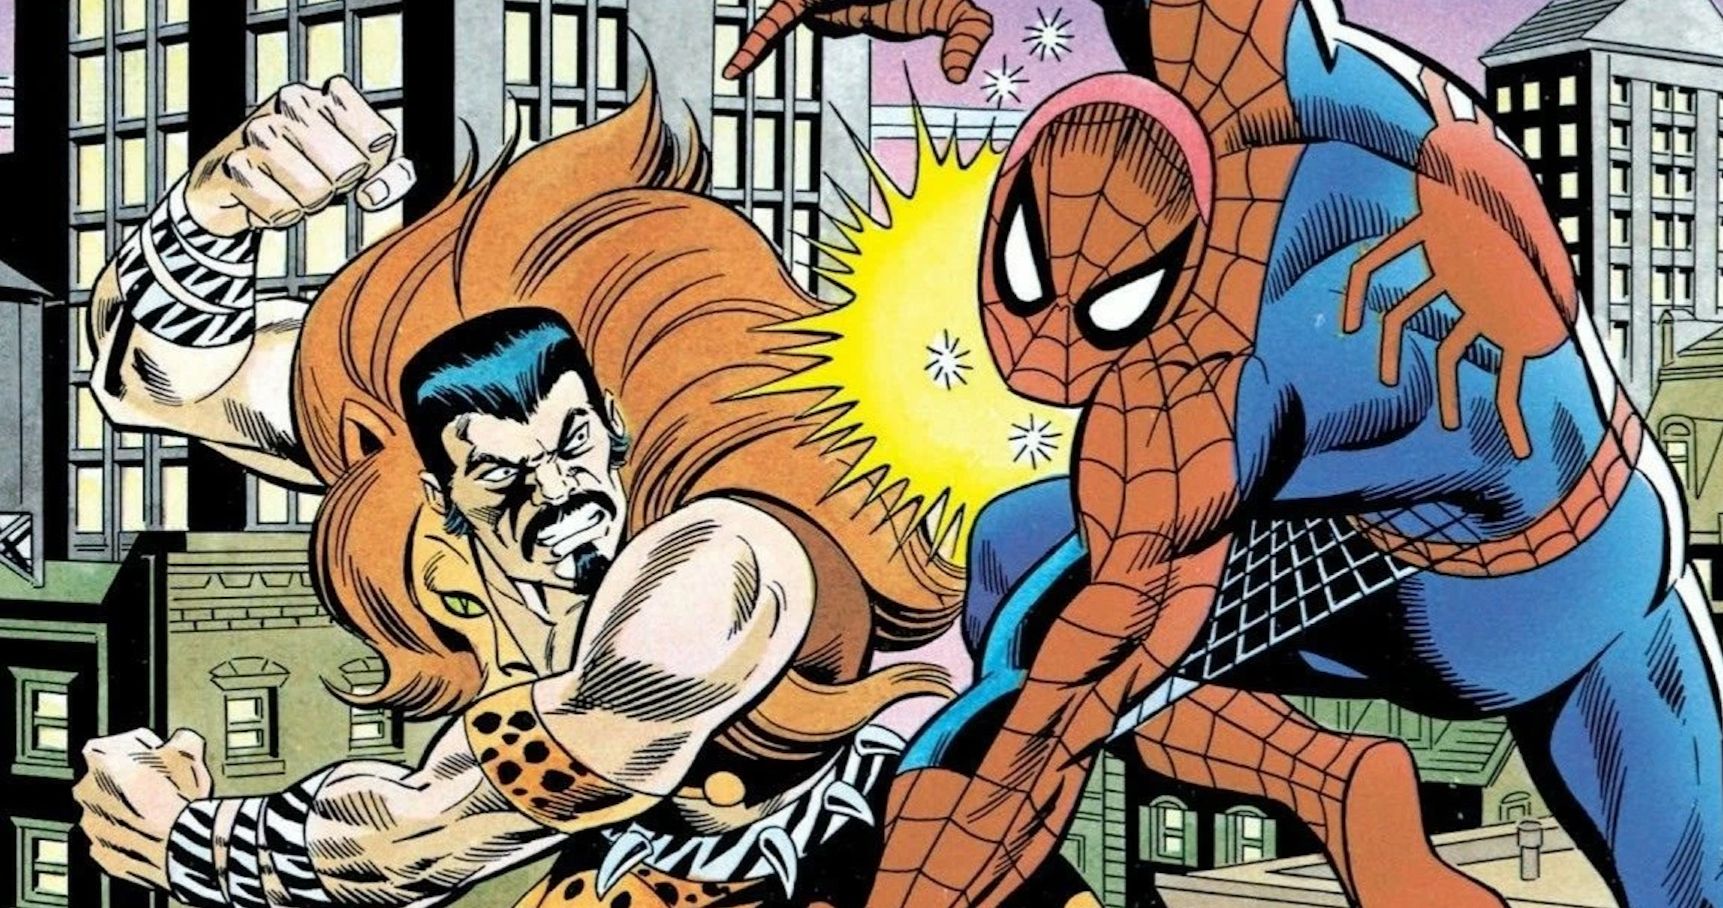 Kraven the Hunter Villain Revealed and It's One of Spider-Man's Biggest Bad Guys?